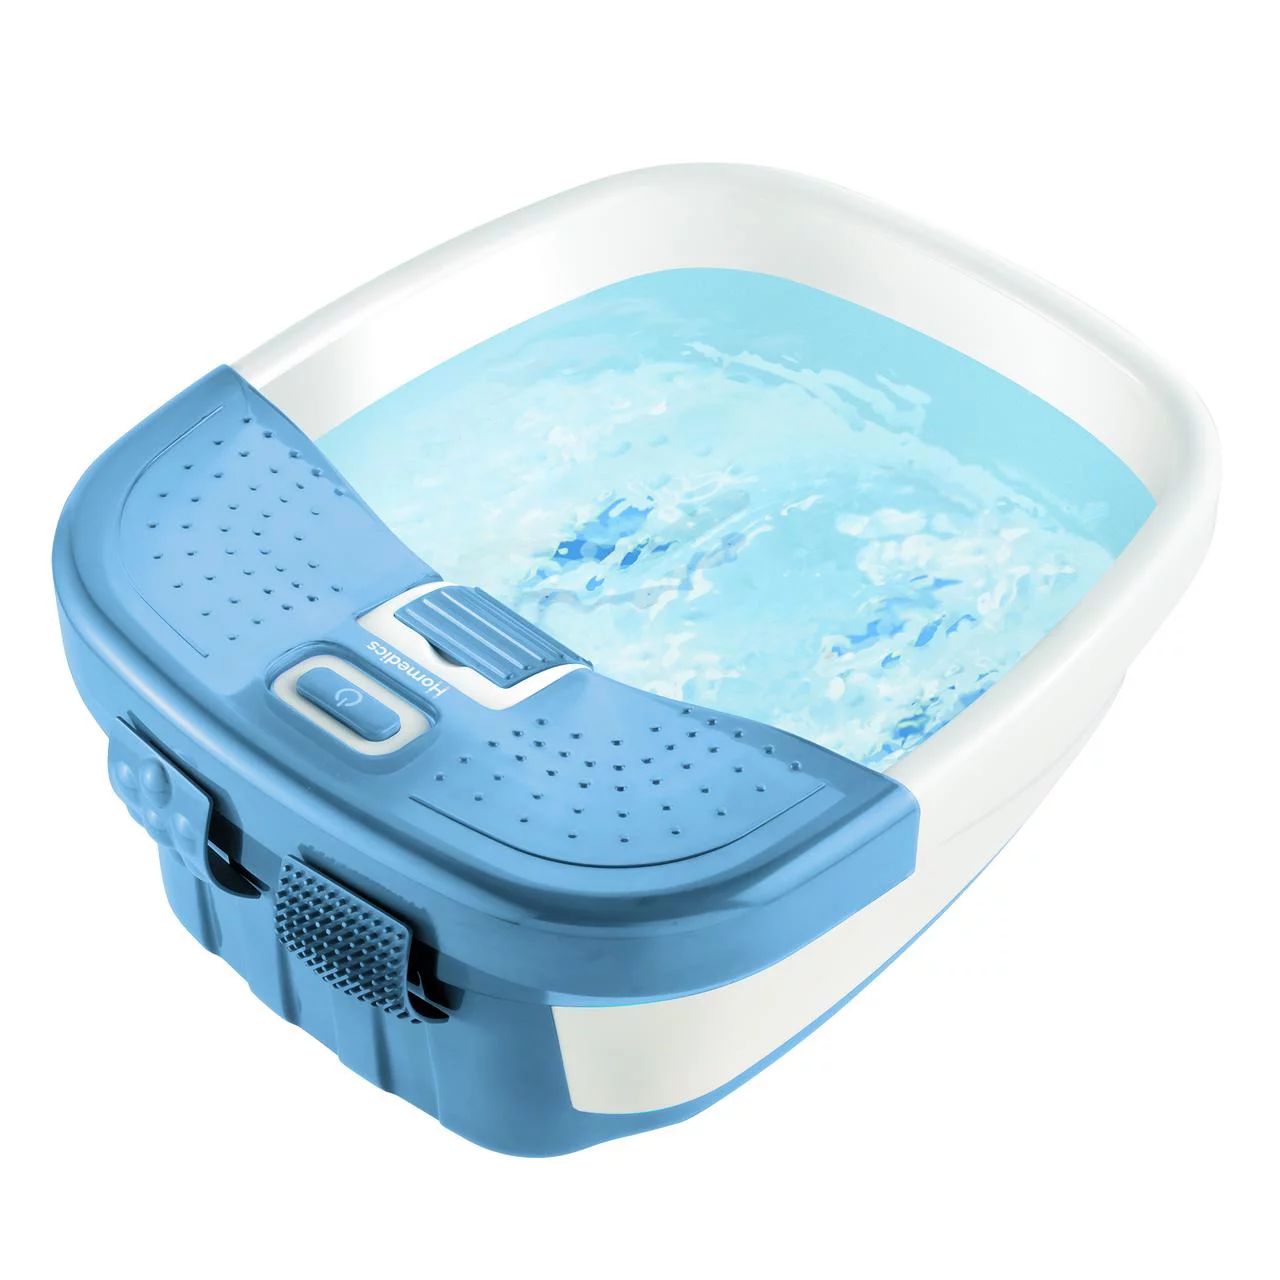 Homedics Bubble Bliss® Deluxe Foot Spa Surrounds Your Feet with Massaging Bubbles - Blue - Walma... | Walmart (US)